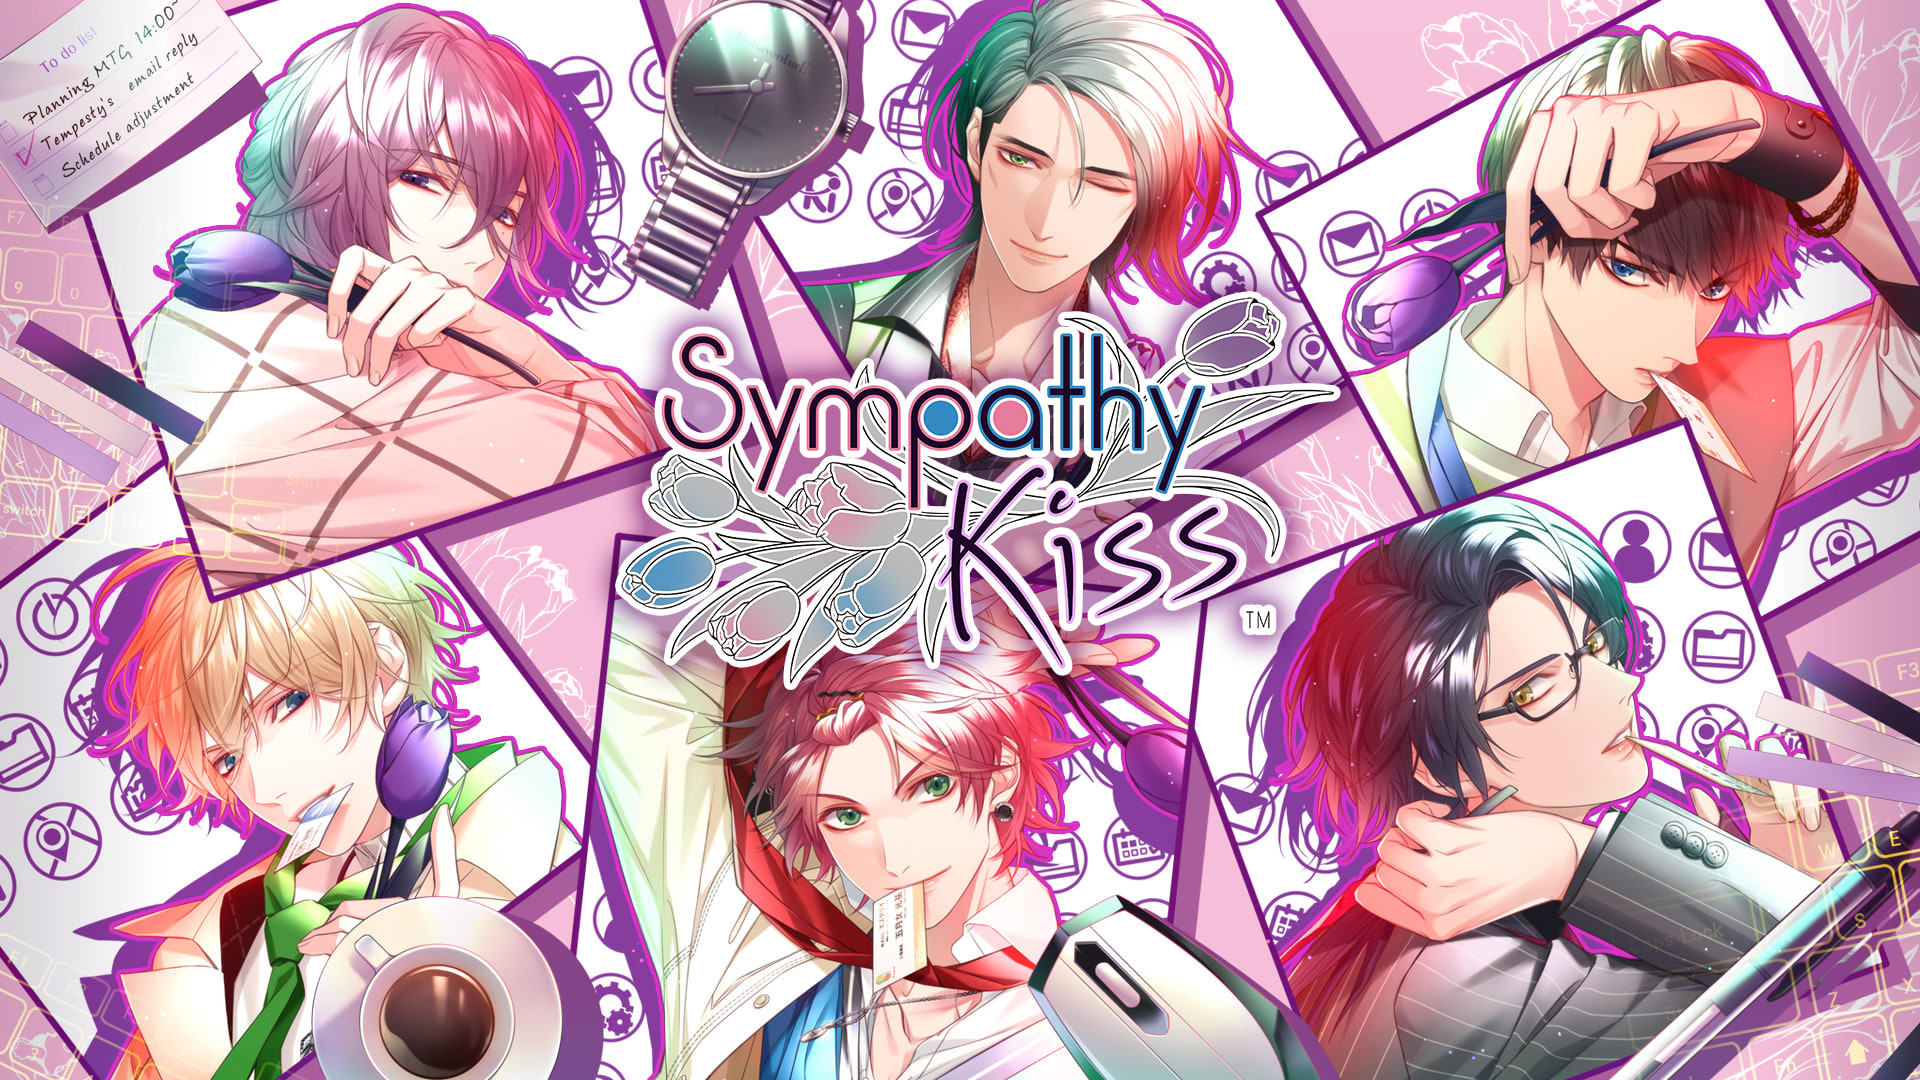 Sympathy Kiss for Nintendo Switch - Nintendo Official Site